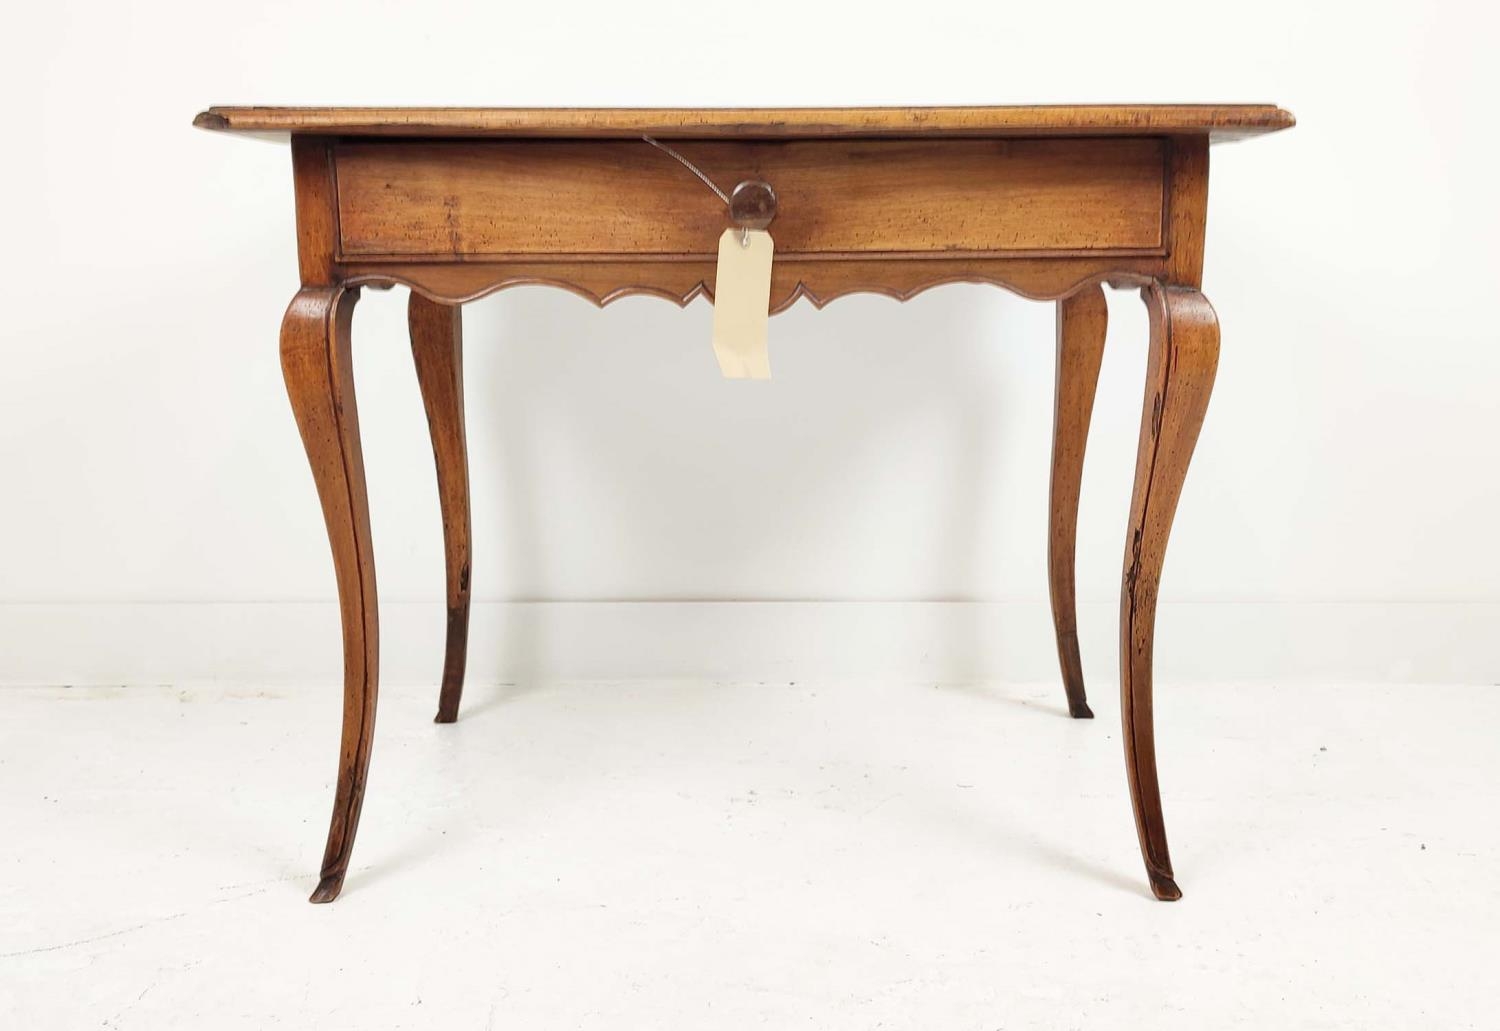 SIDE TABLE, late 18th/early 19th century French provincial walnut with single drawer, 97cm L x - Image 2 of 9